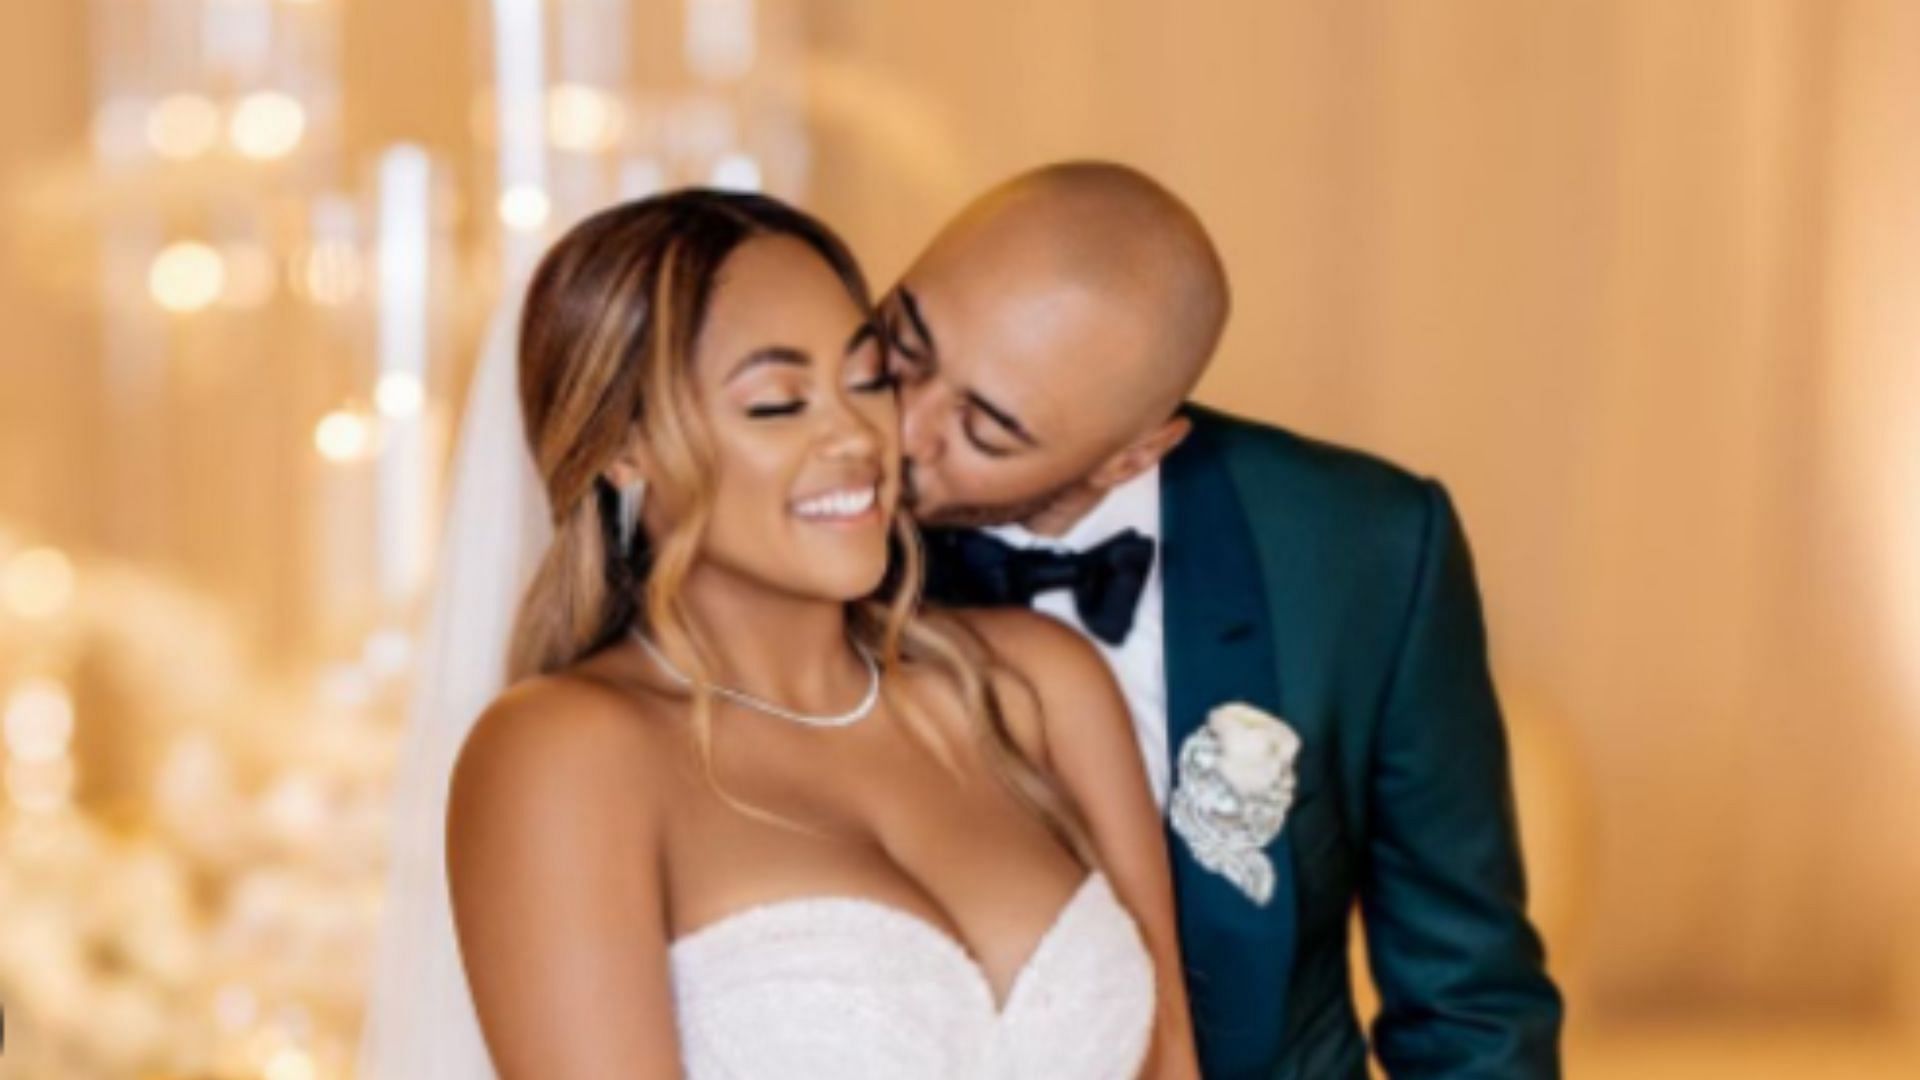 Exclusive Photos and Interview: MLB Star Mookie Betts Marries His